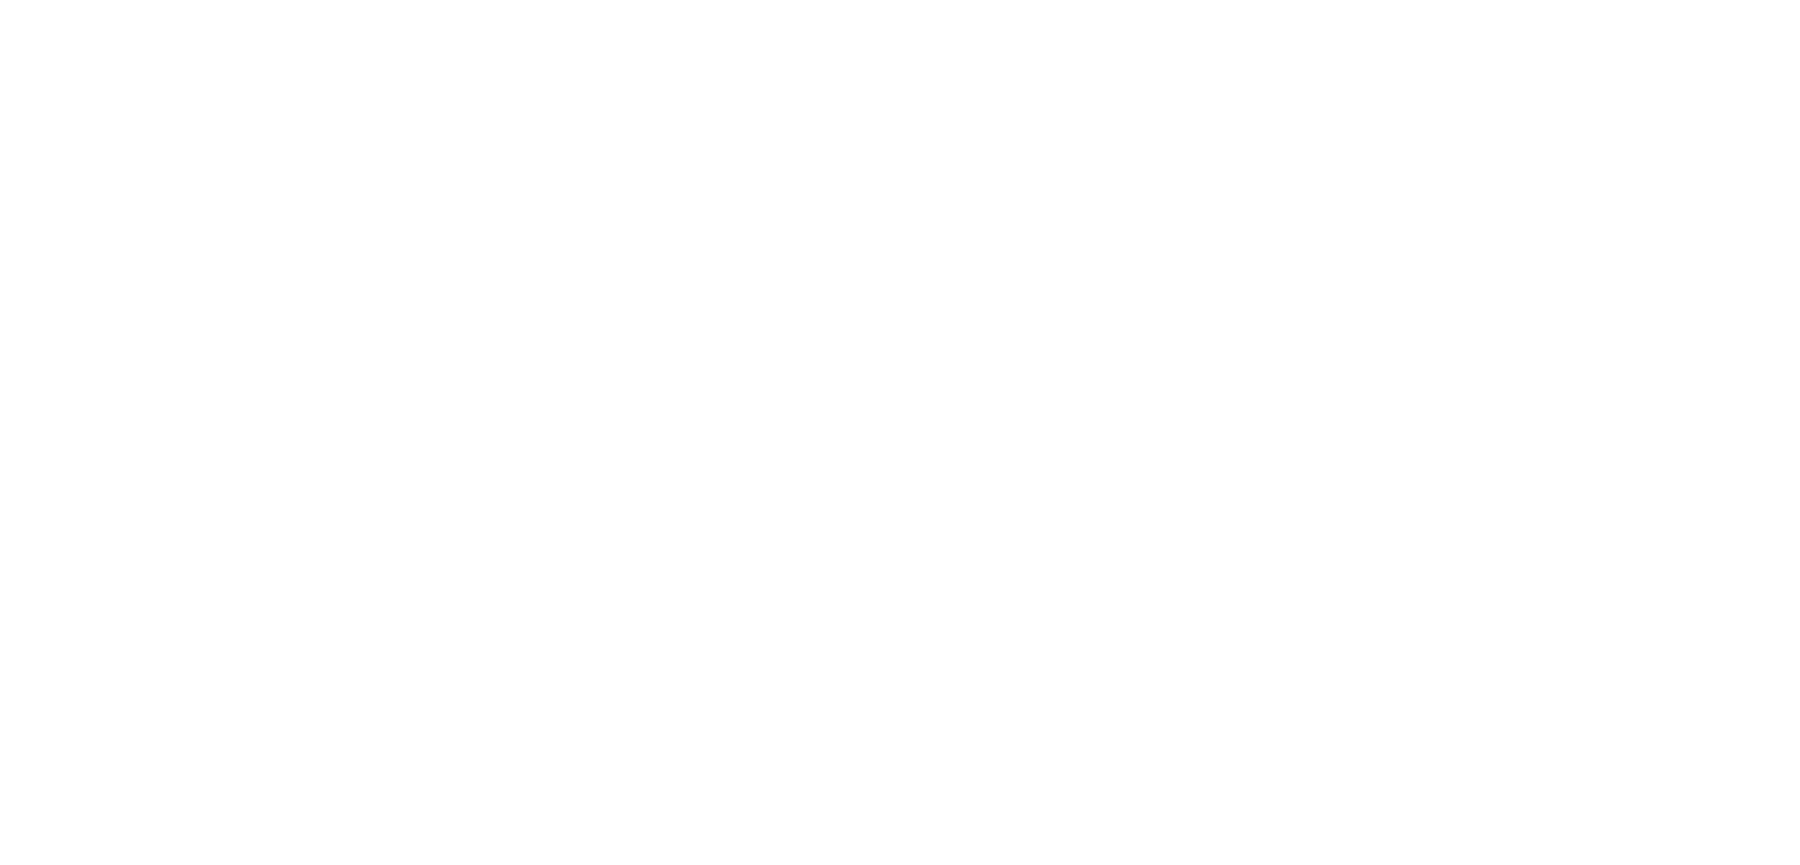 Distributed $15.3 million dollars in 40 years (and counting!)